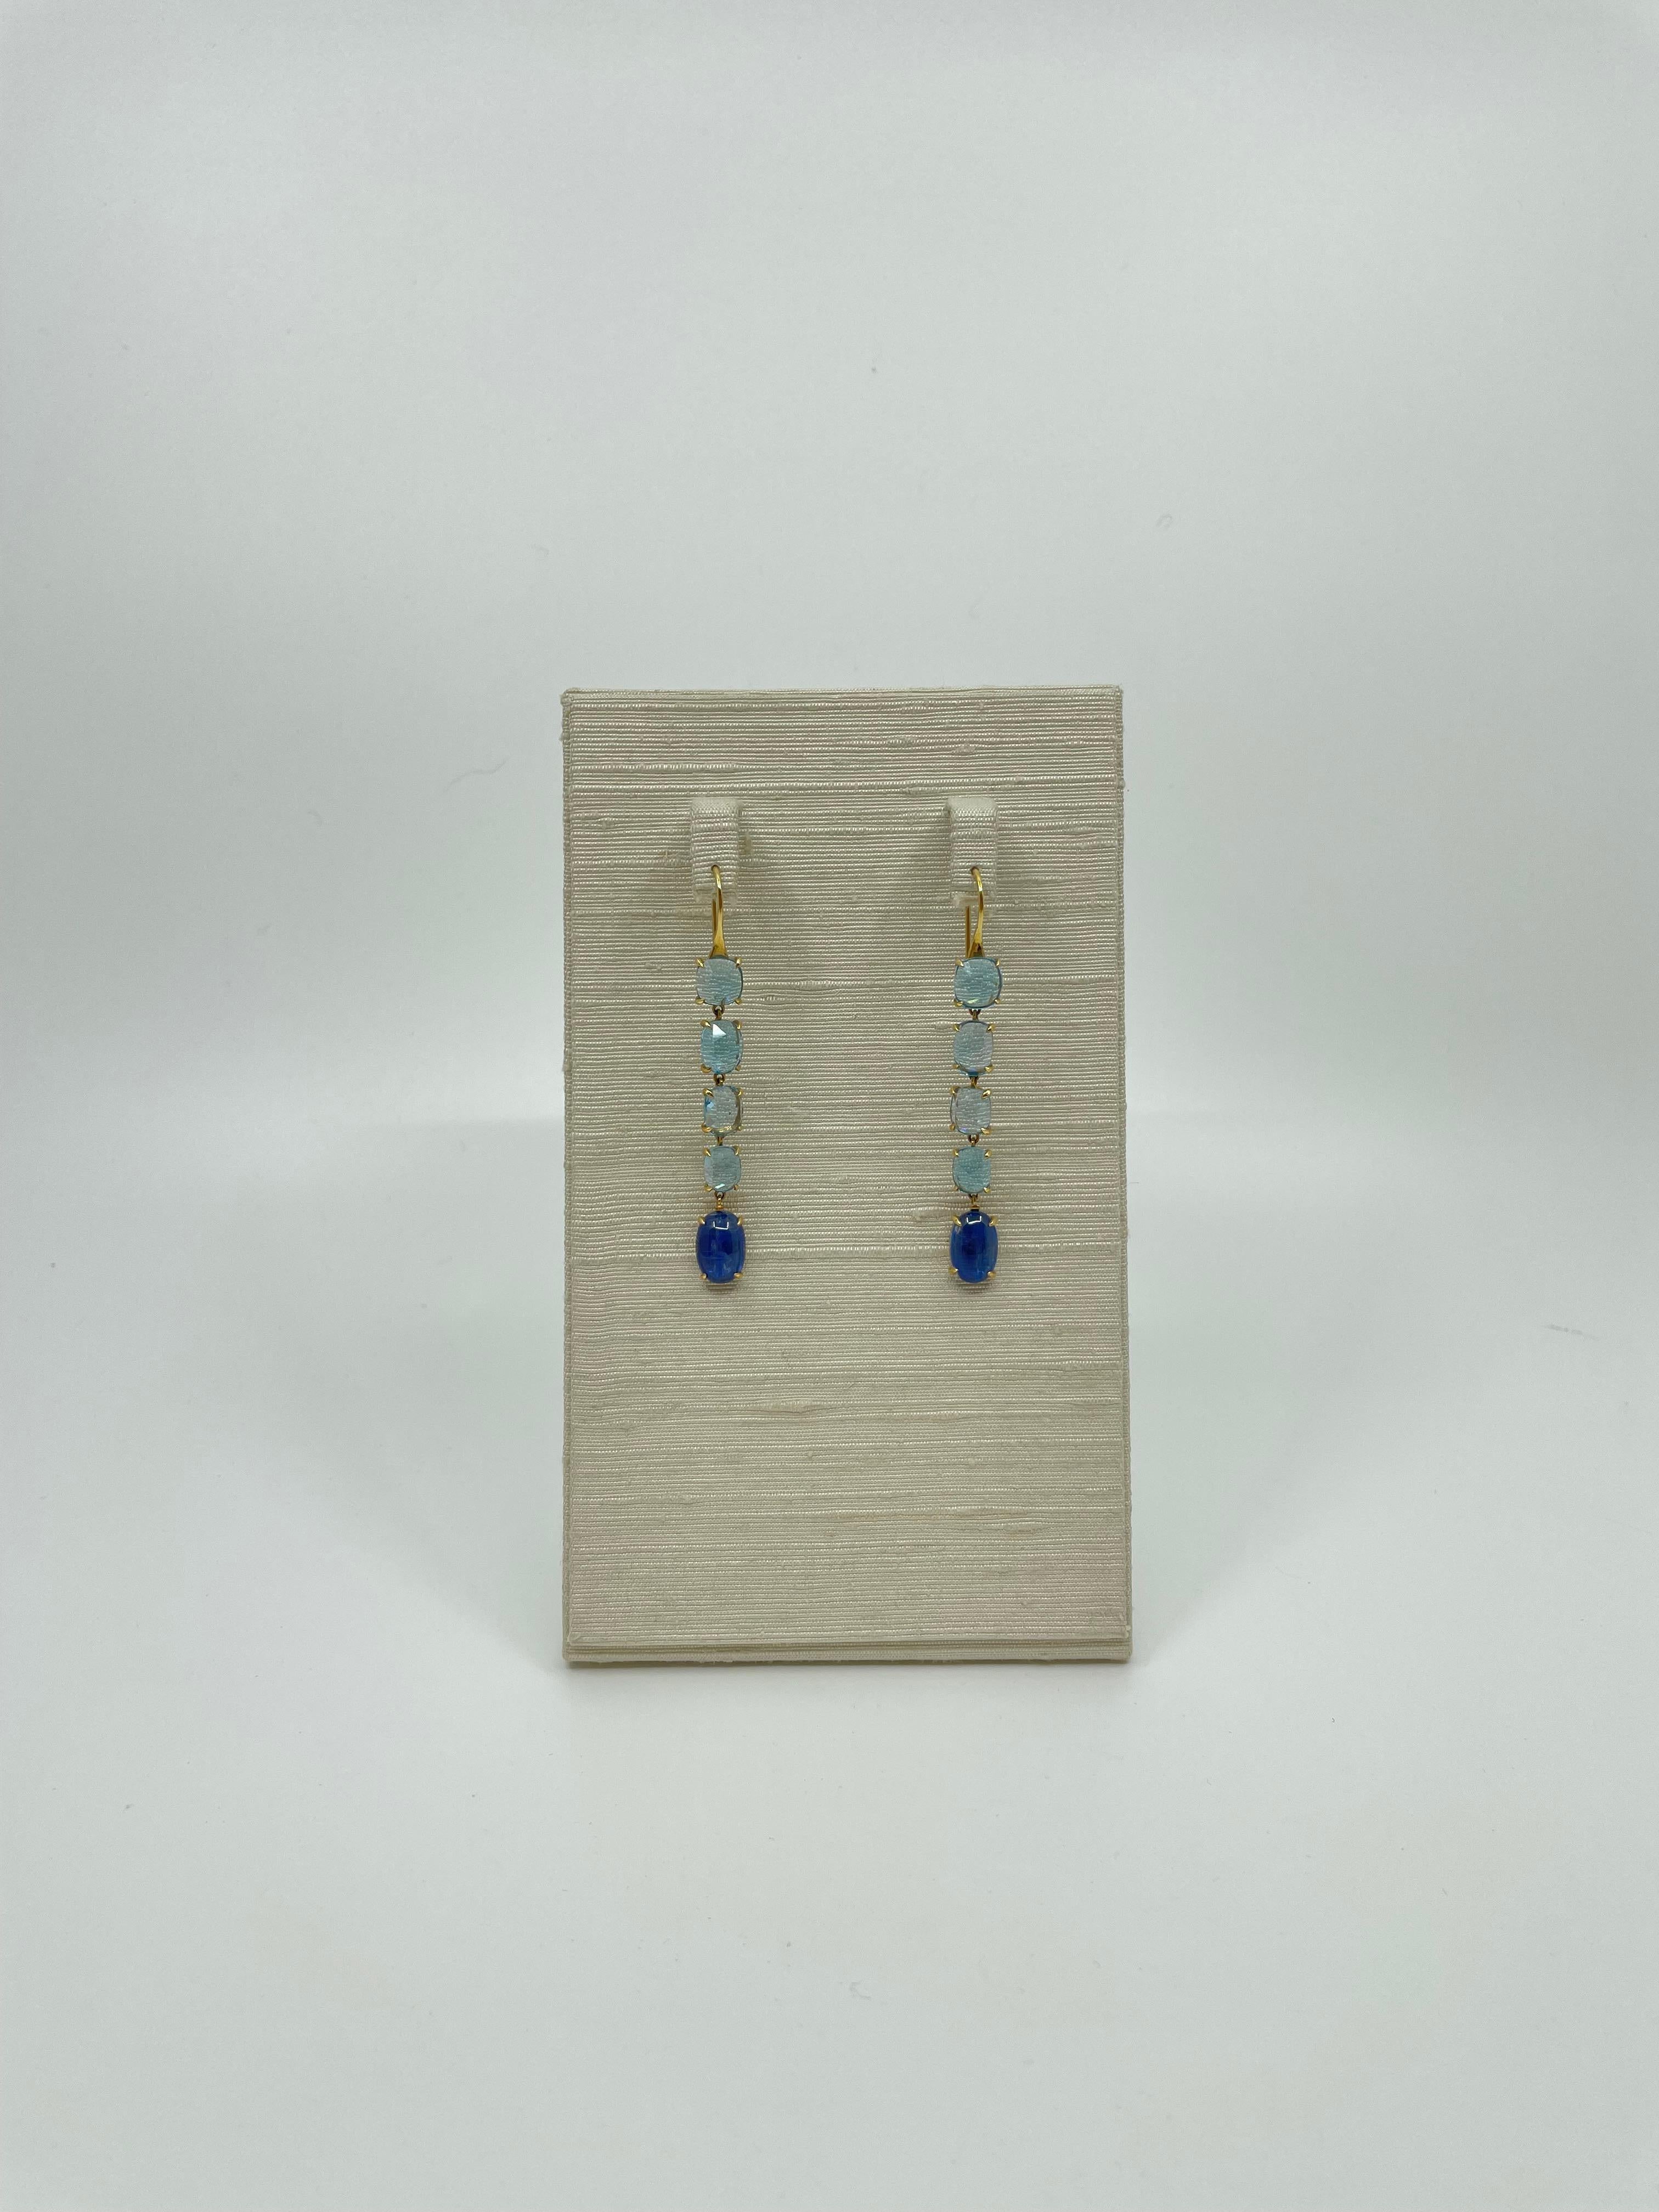 From our Amalfi collection, a charming pair of earrings hand-worked with a gold hook and a pendant of four facet-cut translucent blue topaz beads above a vibrant blue kyanite bead, wonderful for special occasions.

The Amalfi Collection
Evoking the